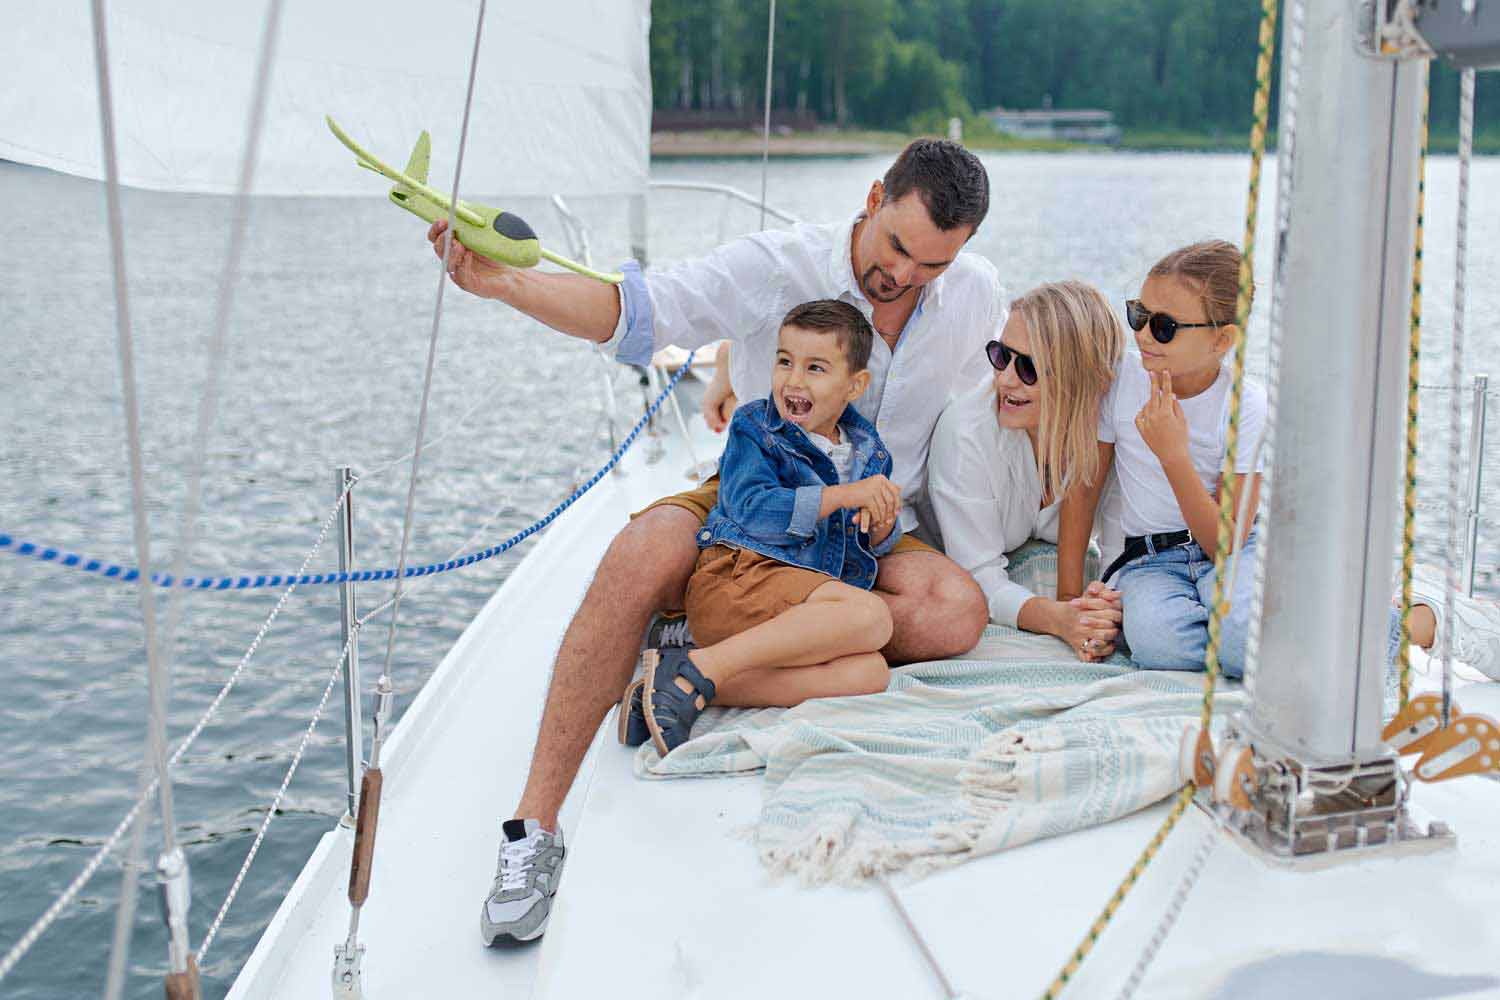 Family On a Boat. Father Playing With Son, Mother and Daughter Wearing Sun Glasses